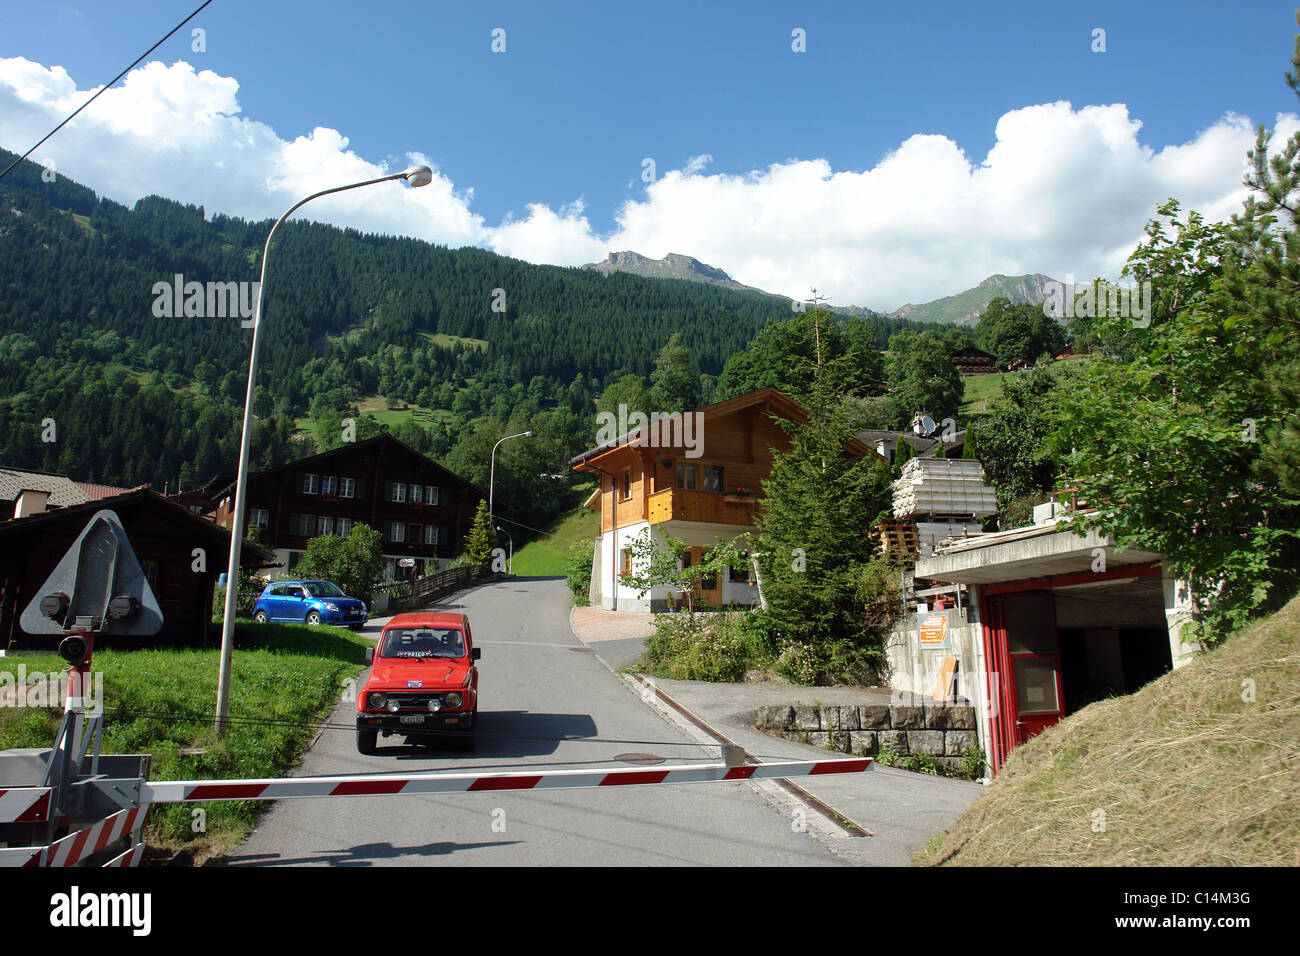 Vehicle at traffic intersection in Switzerland, as seen from train passing through. Beautiful background with green mountains. Stock Photo